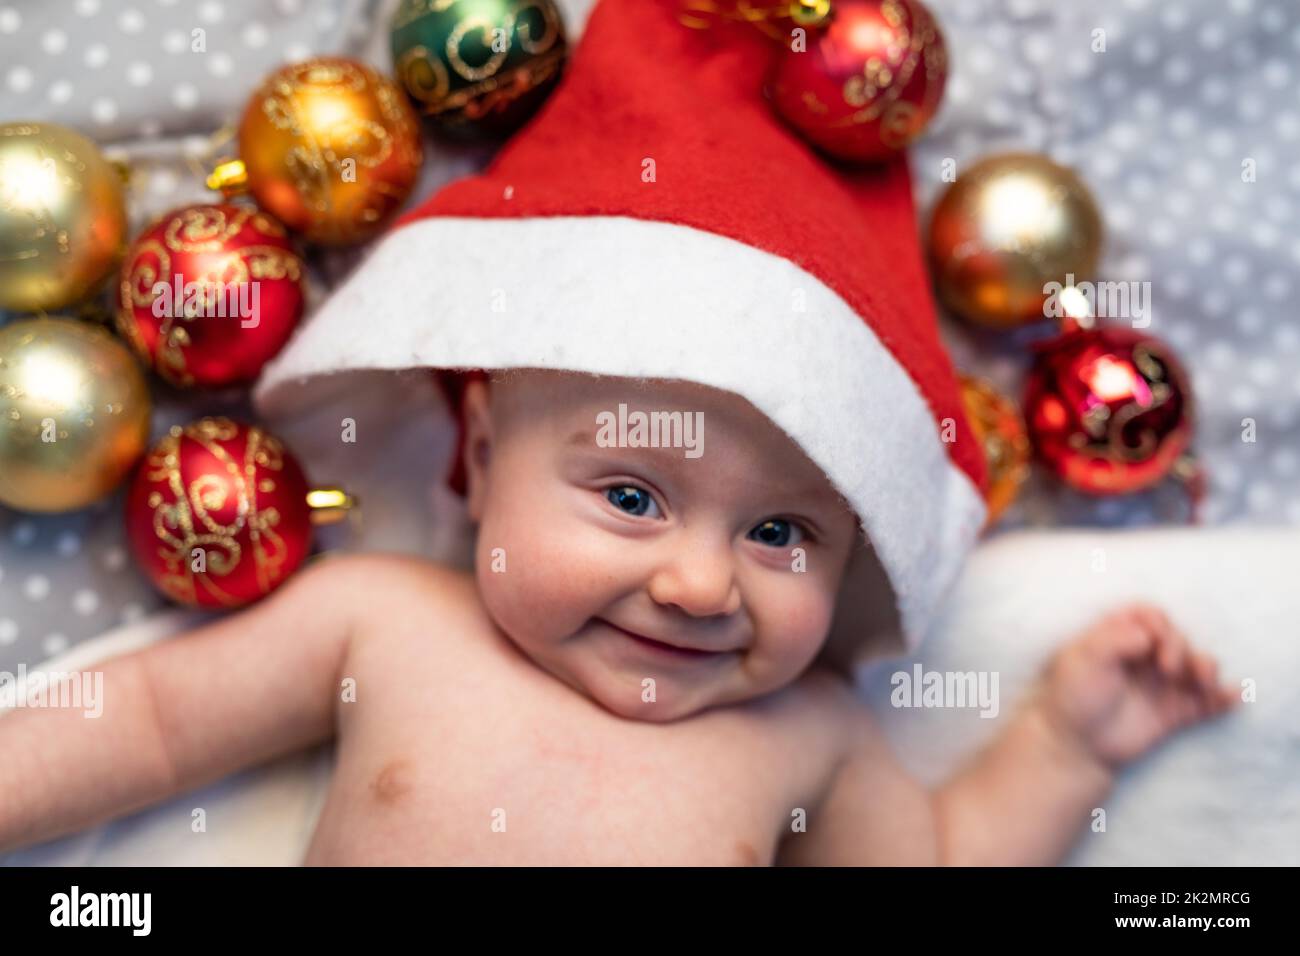 Portrait of baby smiling while wearing a Santa hat Stock Photo